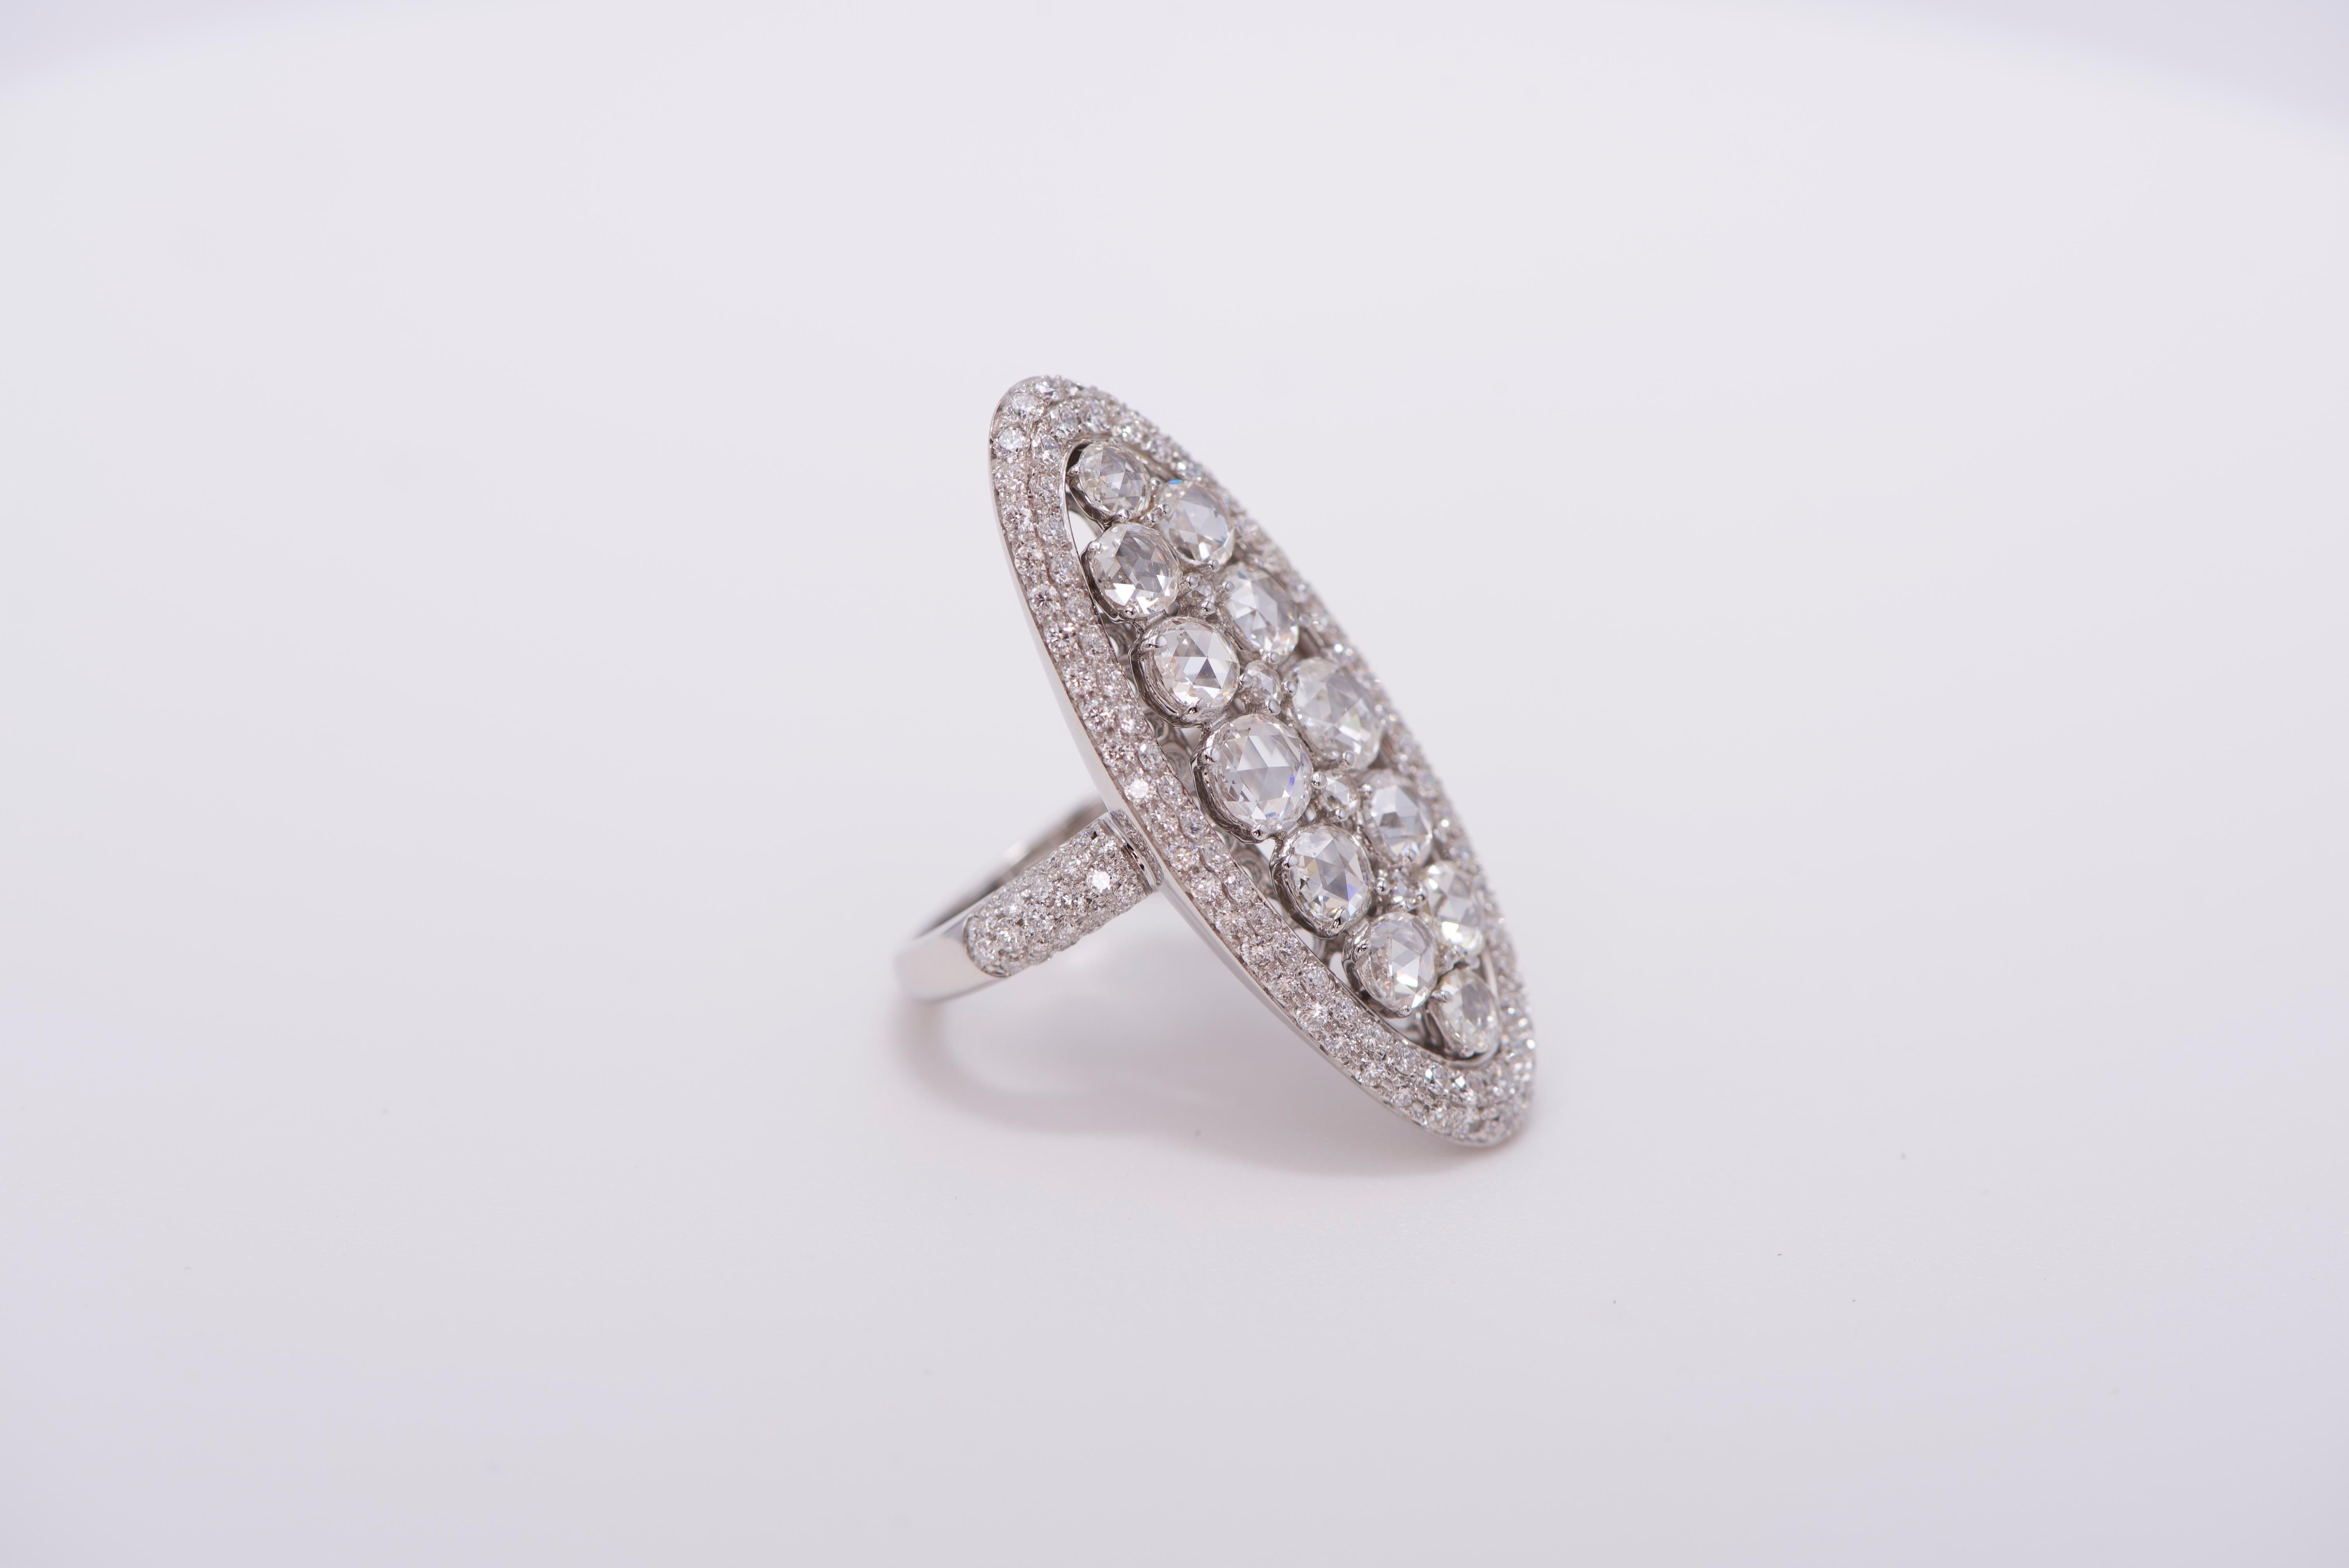 Oval shaped ring in 18K white gold with white diamonds along border, shank, and in center, approx. 3.82 carats of diamonds in total. 